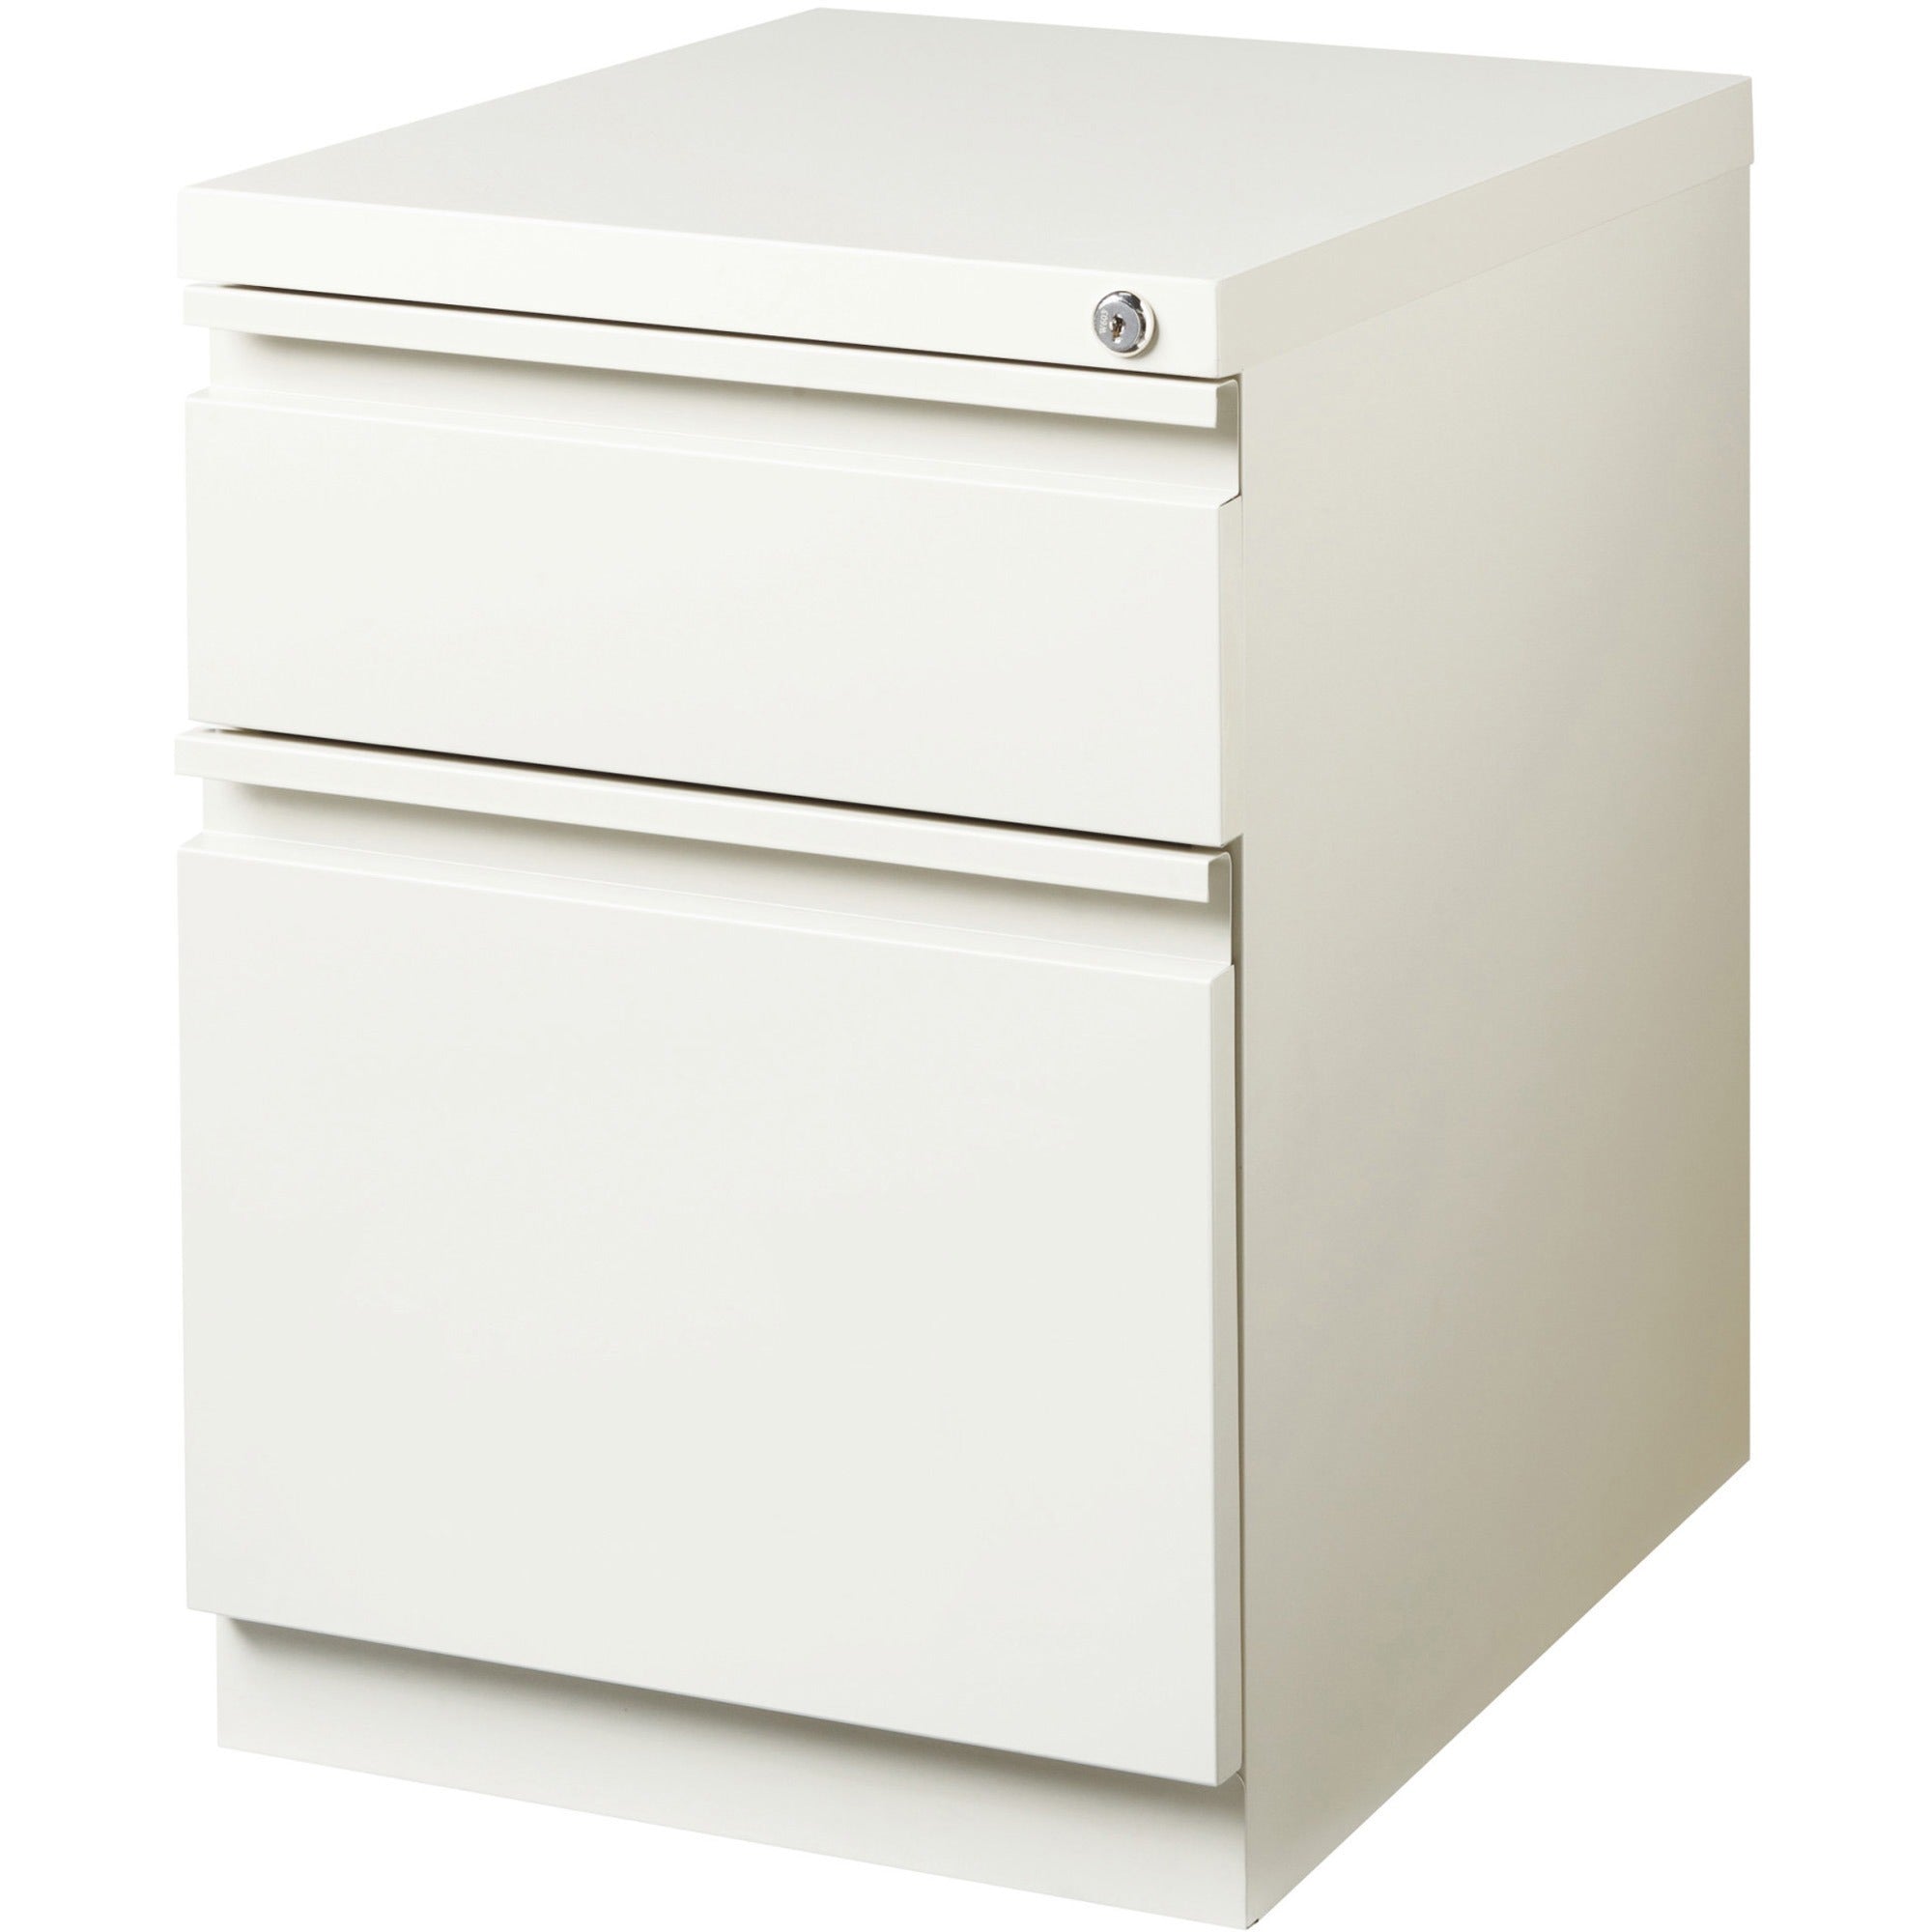 lorell-20-box-file-mobile-pedestal-15-x-199-x-238-for-box-file-letter-mobility-ball-bearing-suspension-removable-lock-pull-out-drawer-recessed-drawer-anti-tip-casters-key-lock-white-steel-recycled_llr00051 - 4